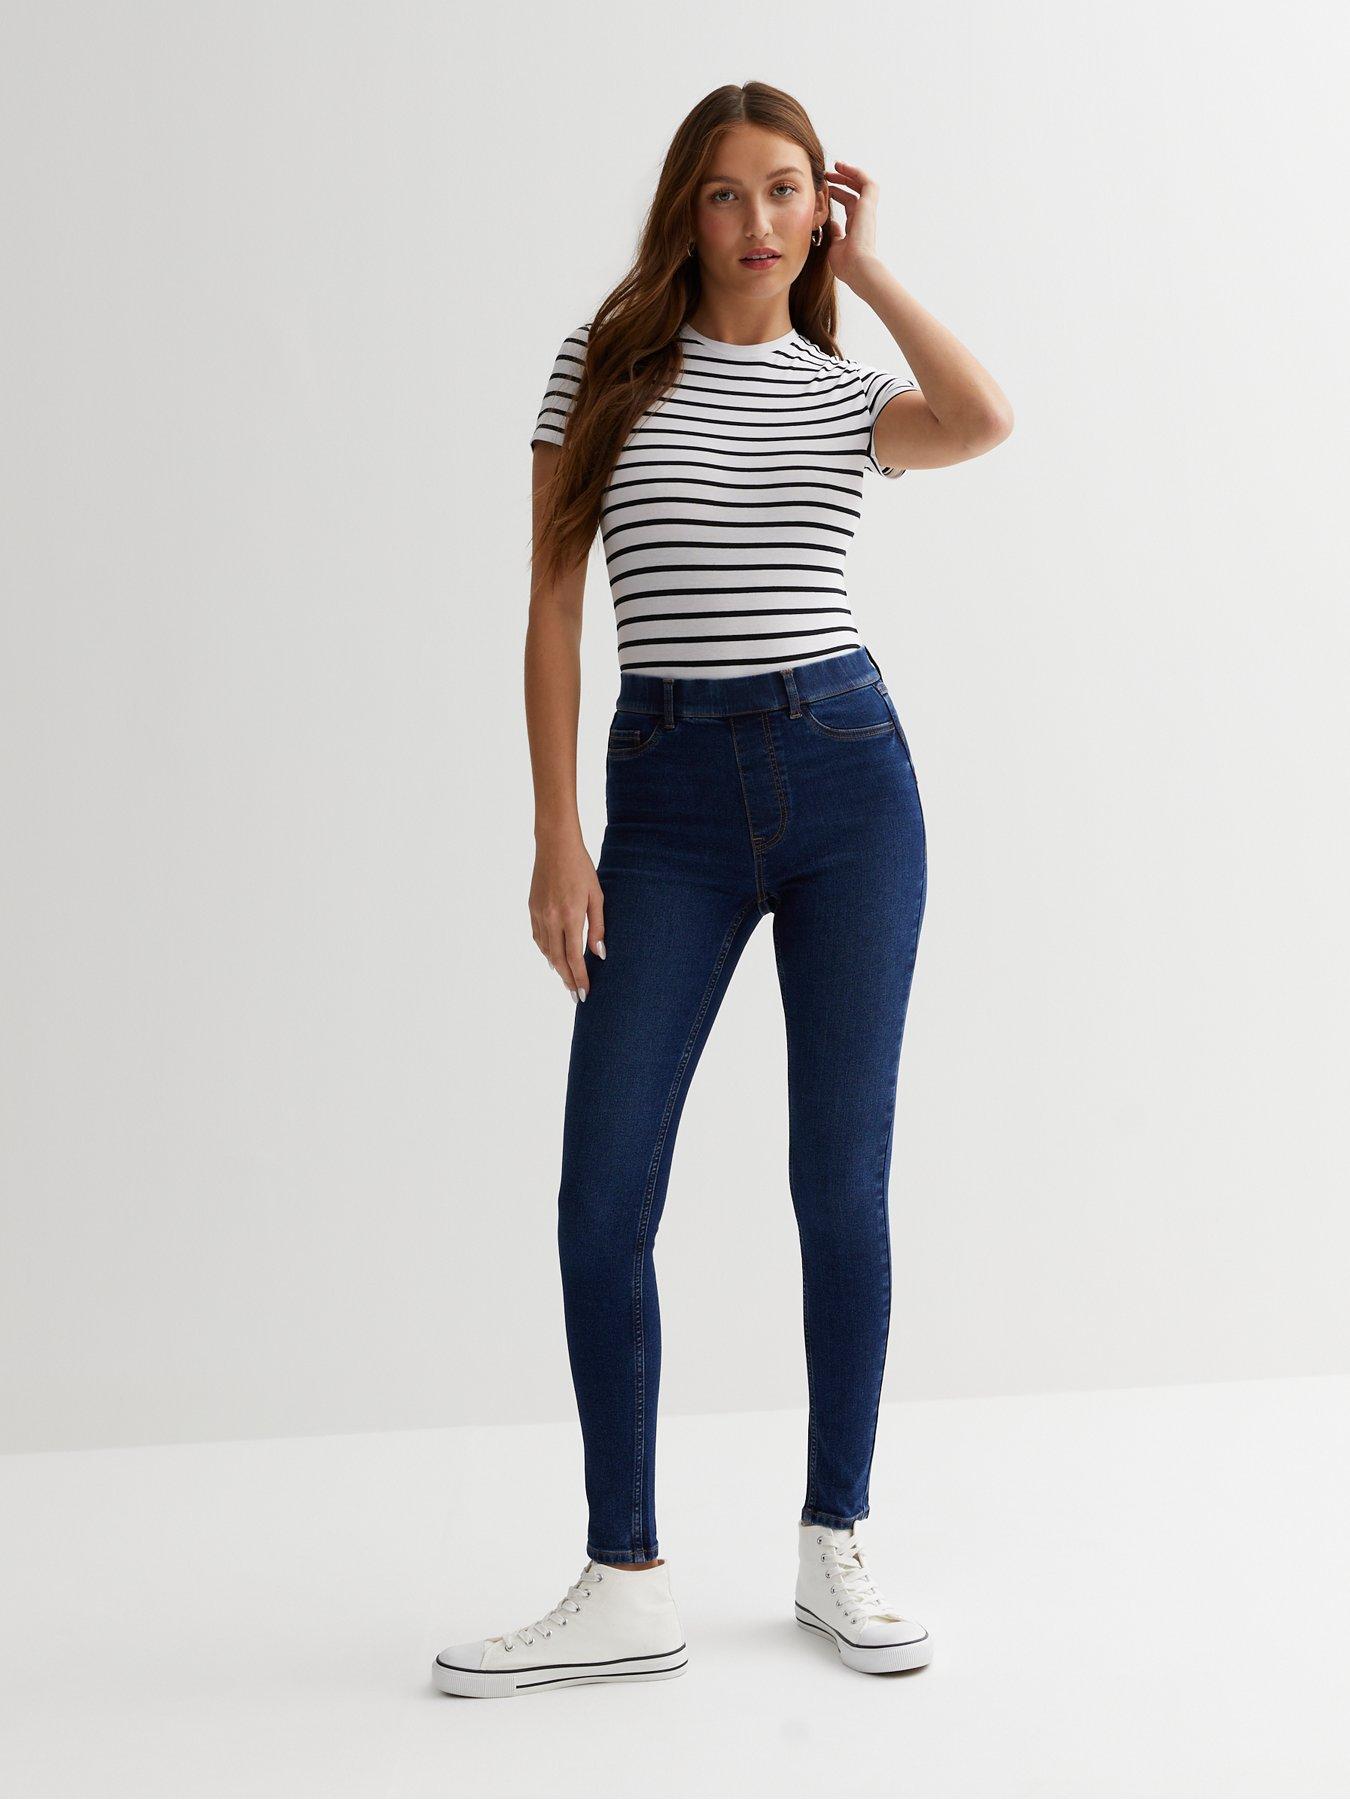 Levi's® Womens Plus Mid Rise Shaping Jeggings